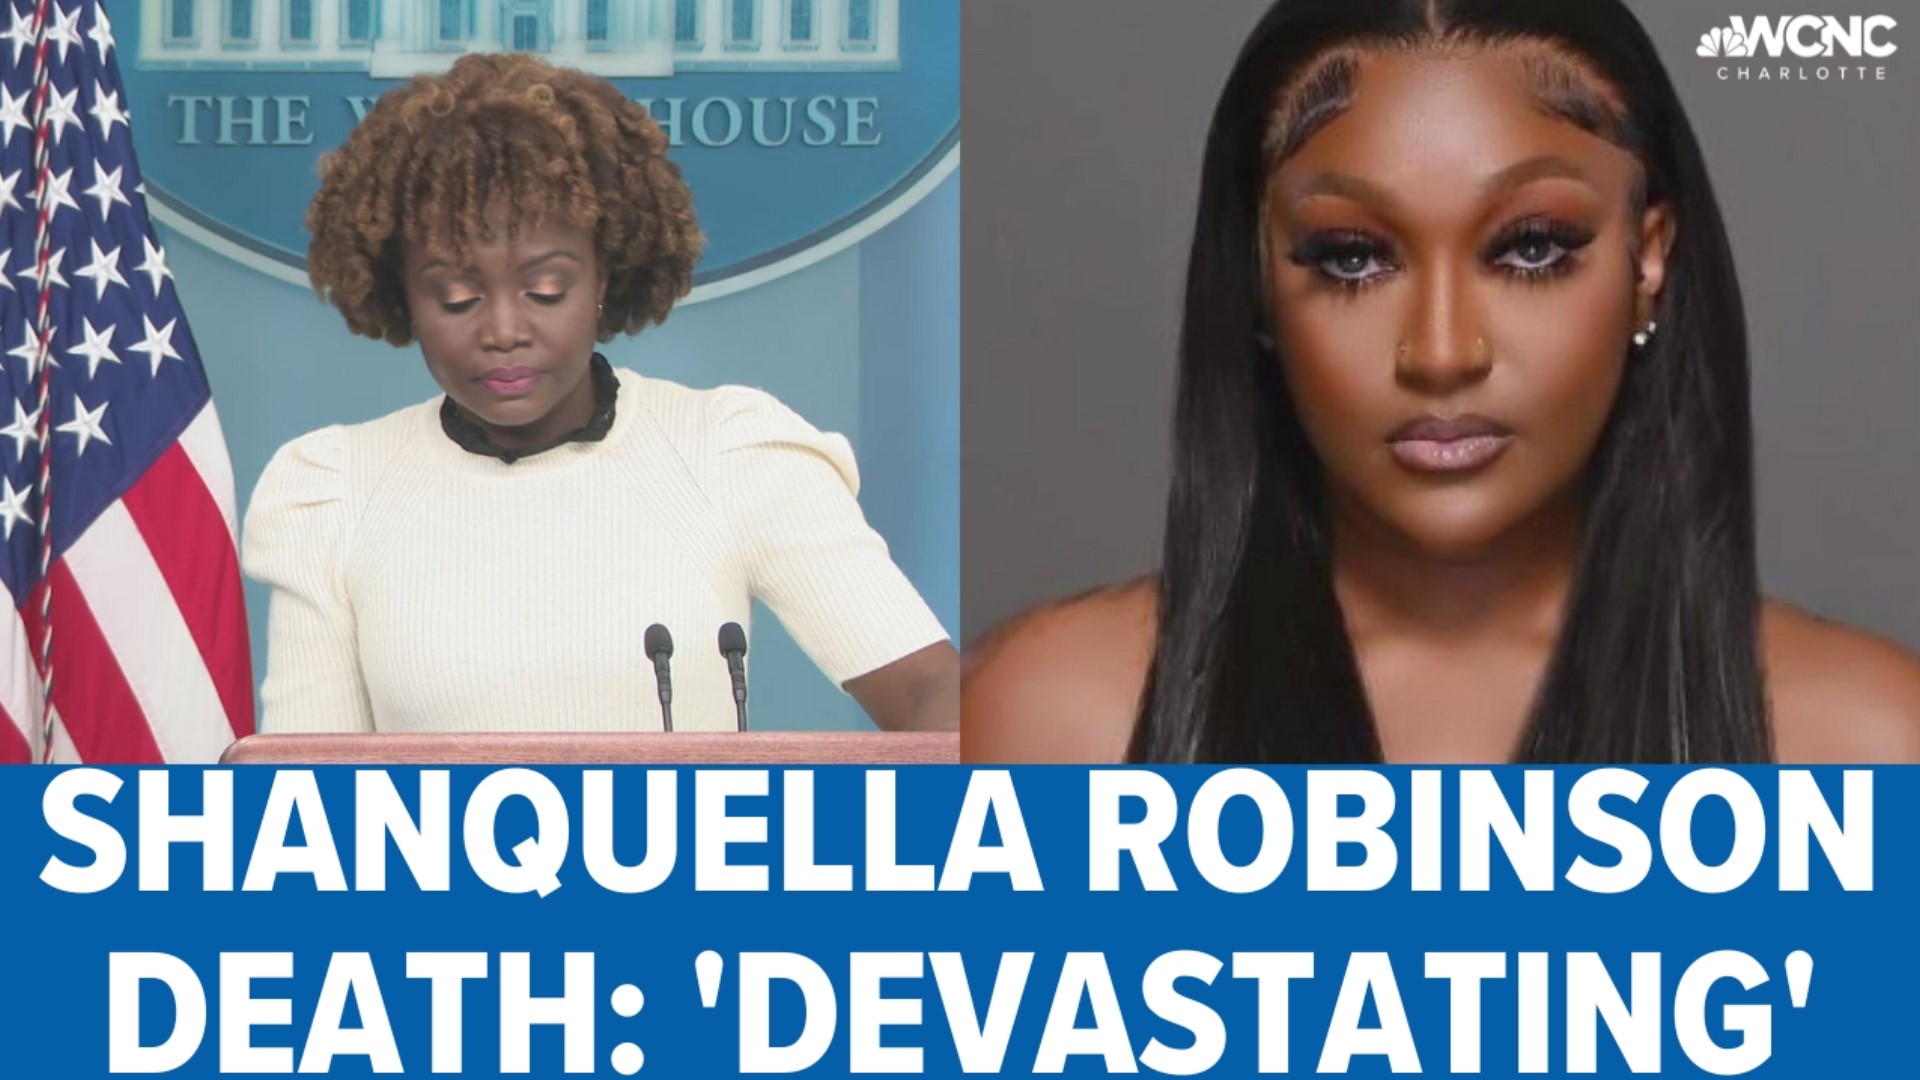 The White House Thursday publically addressed the death of Shanquella Robinson for the first time Thursday.